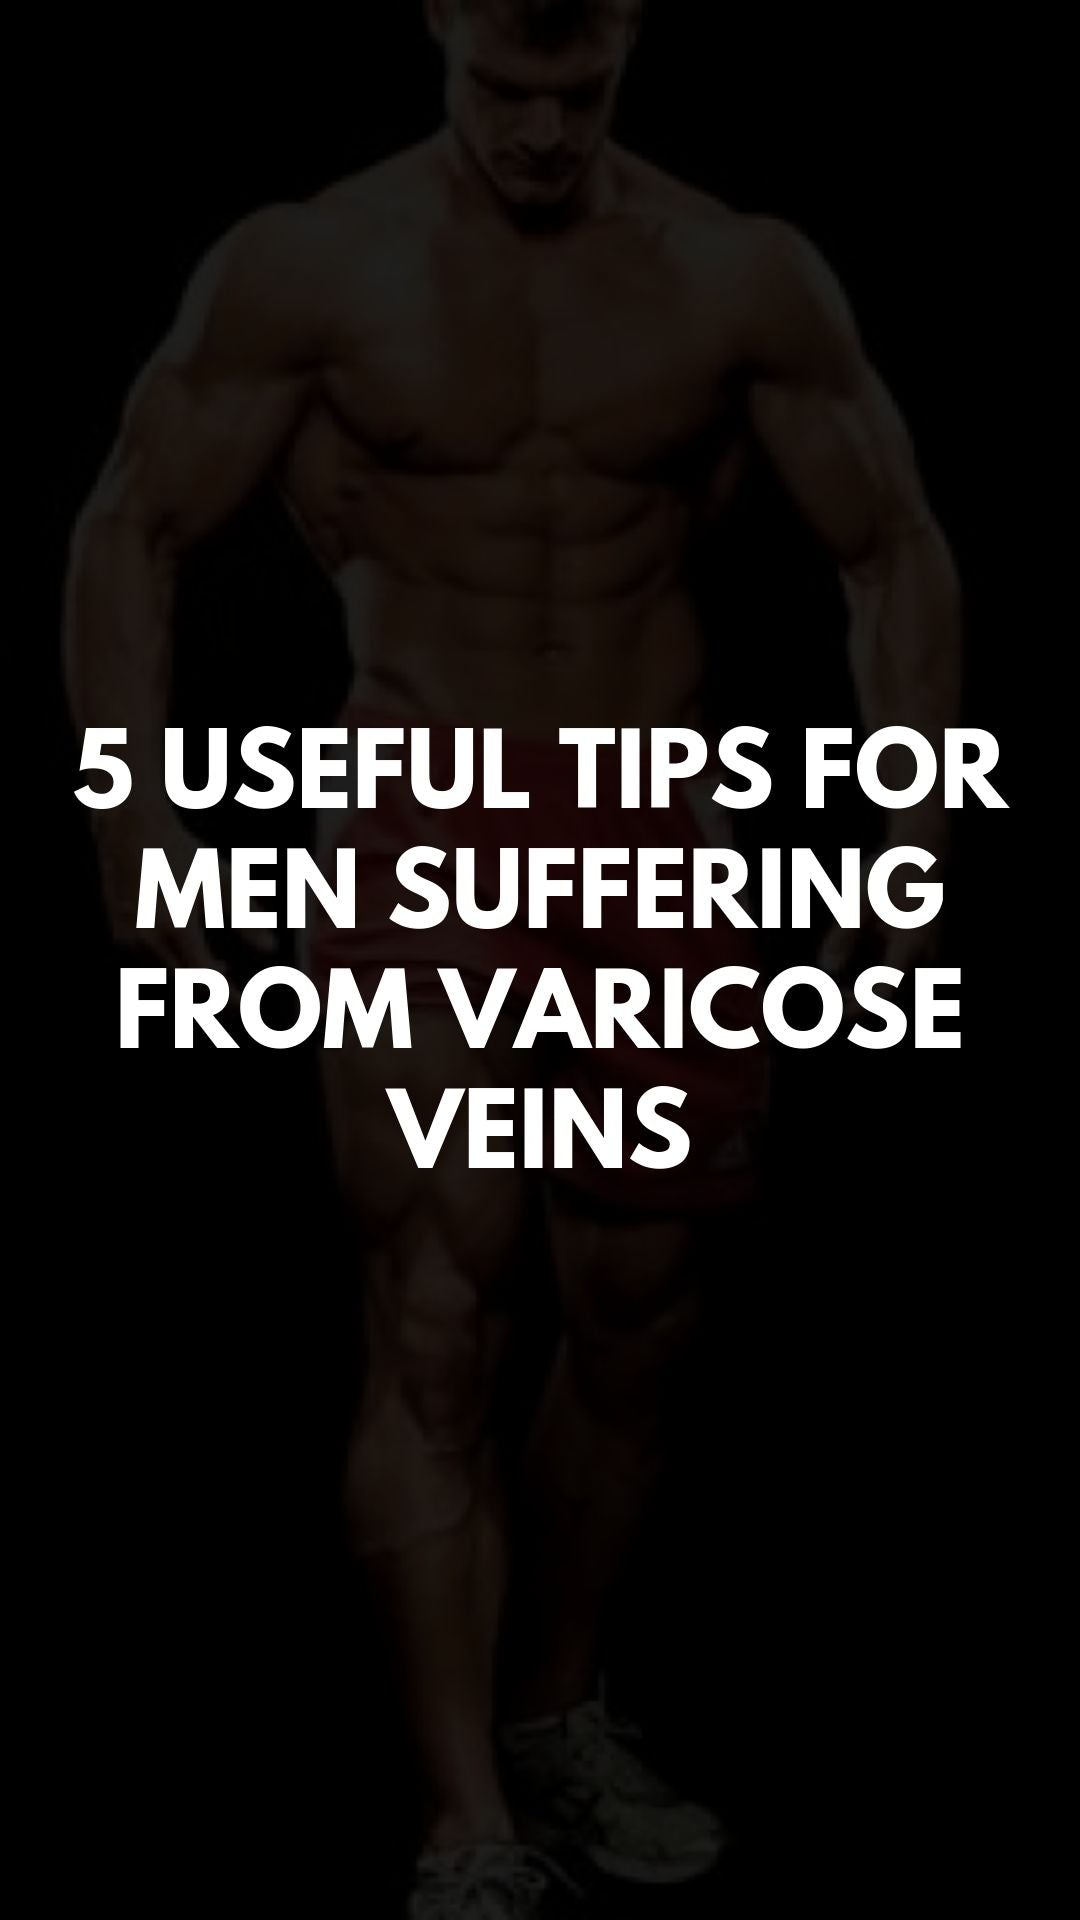 5 Useful Tips for Men Suffering from Varicose Veins